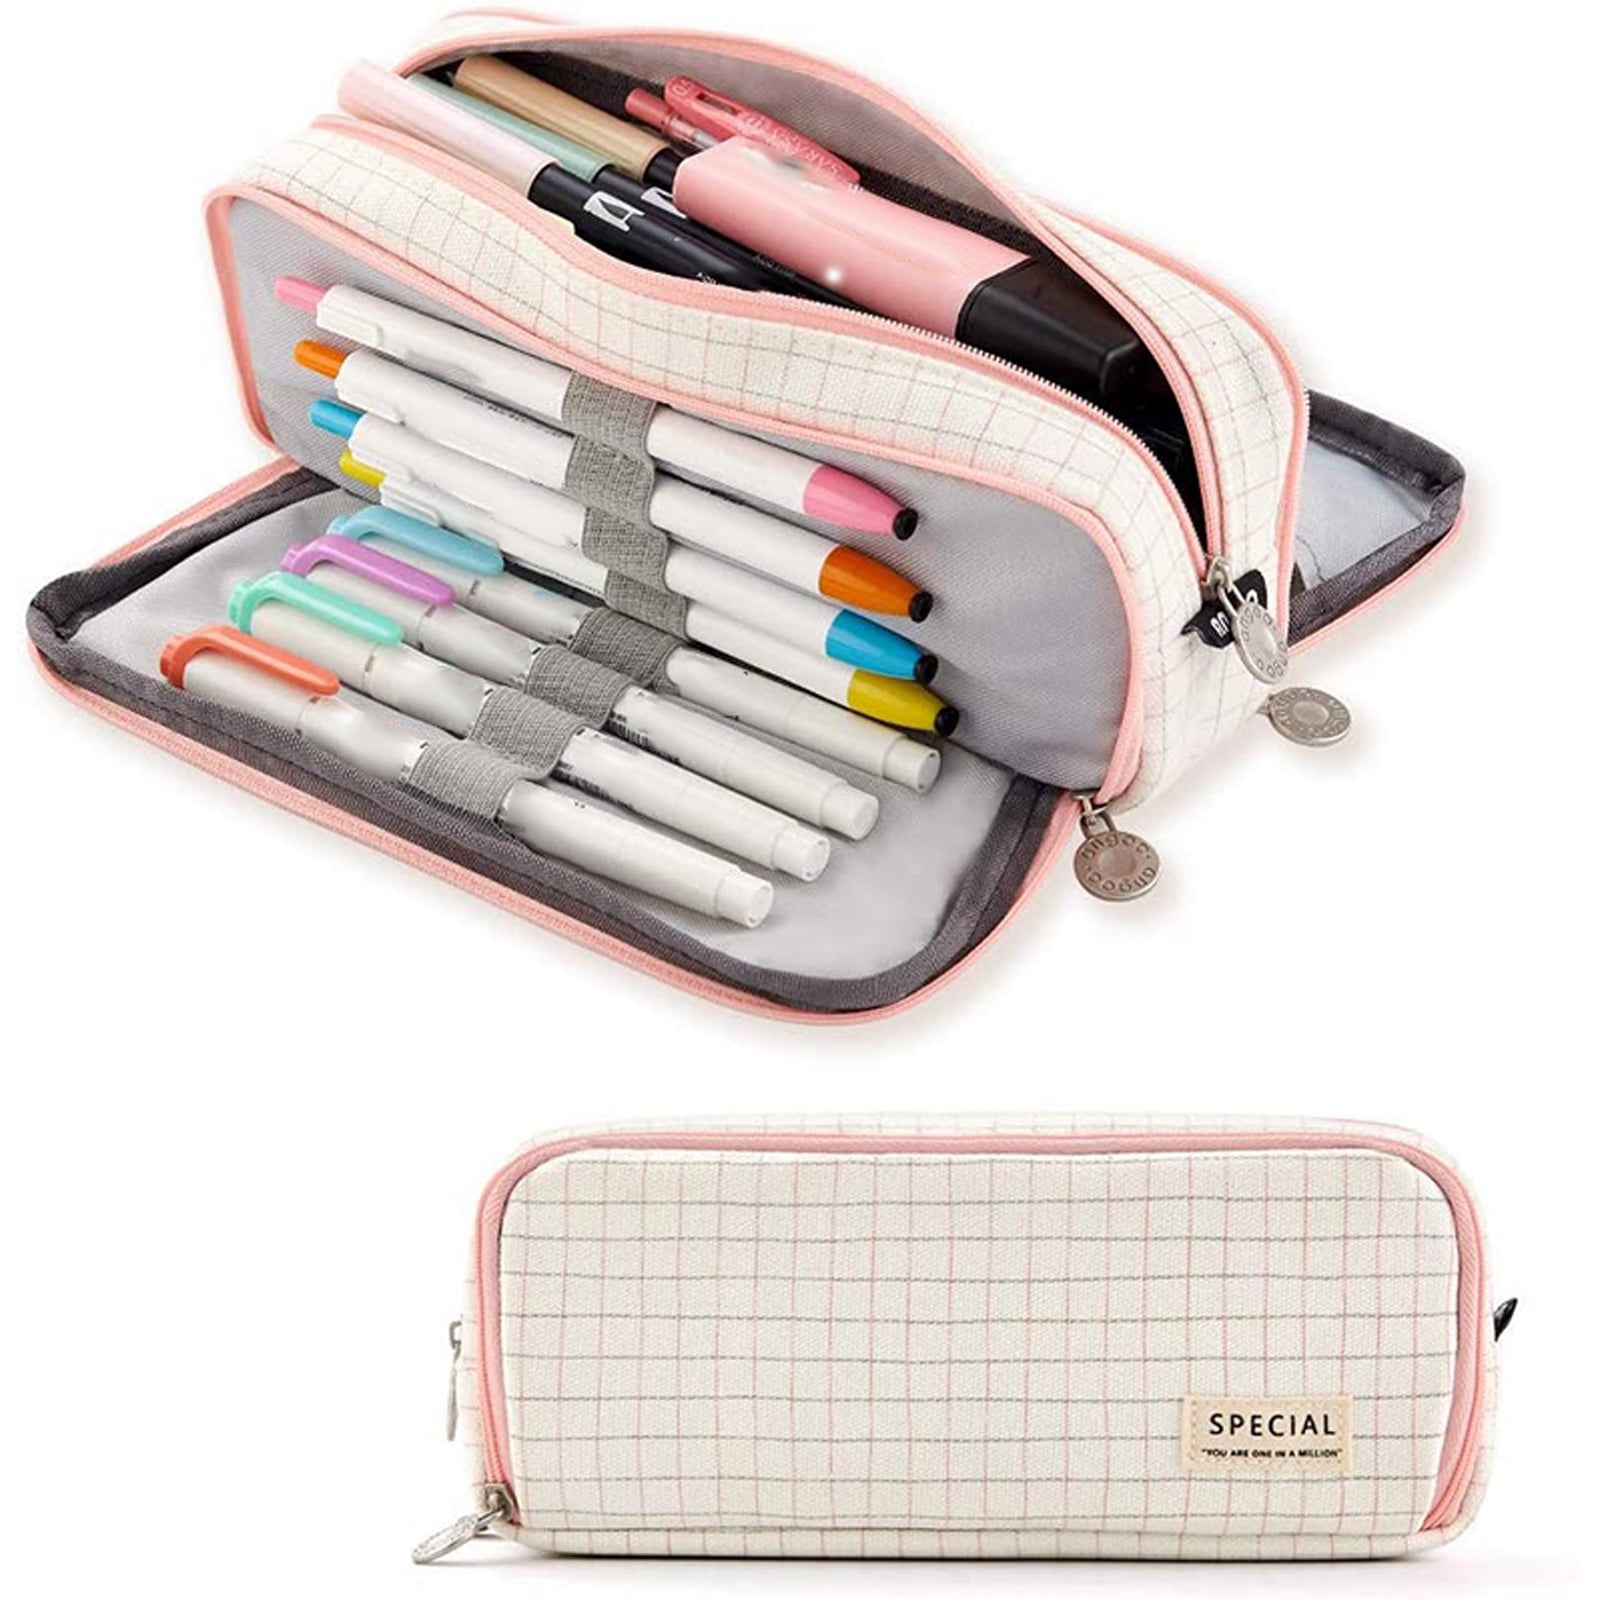 Extra Large Pencil Case with Compartments, HALASAO India